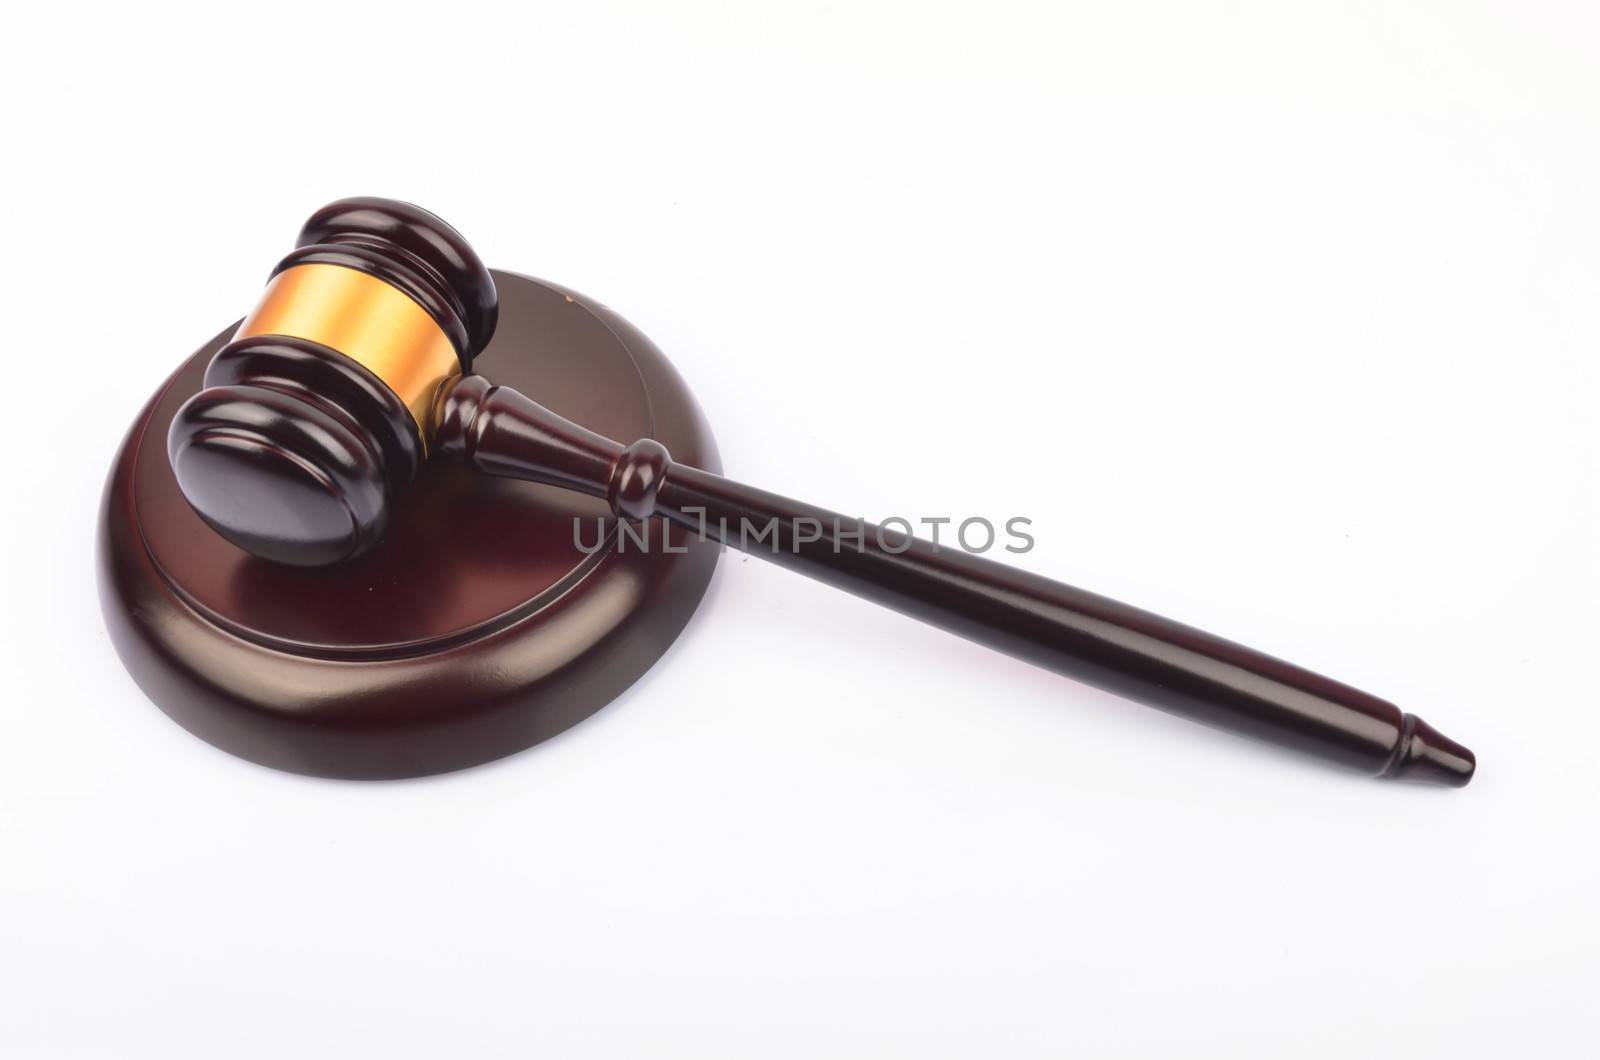 View of a judge hammer or gavel on white background. Law and jurisdiction concept.